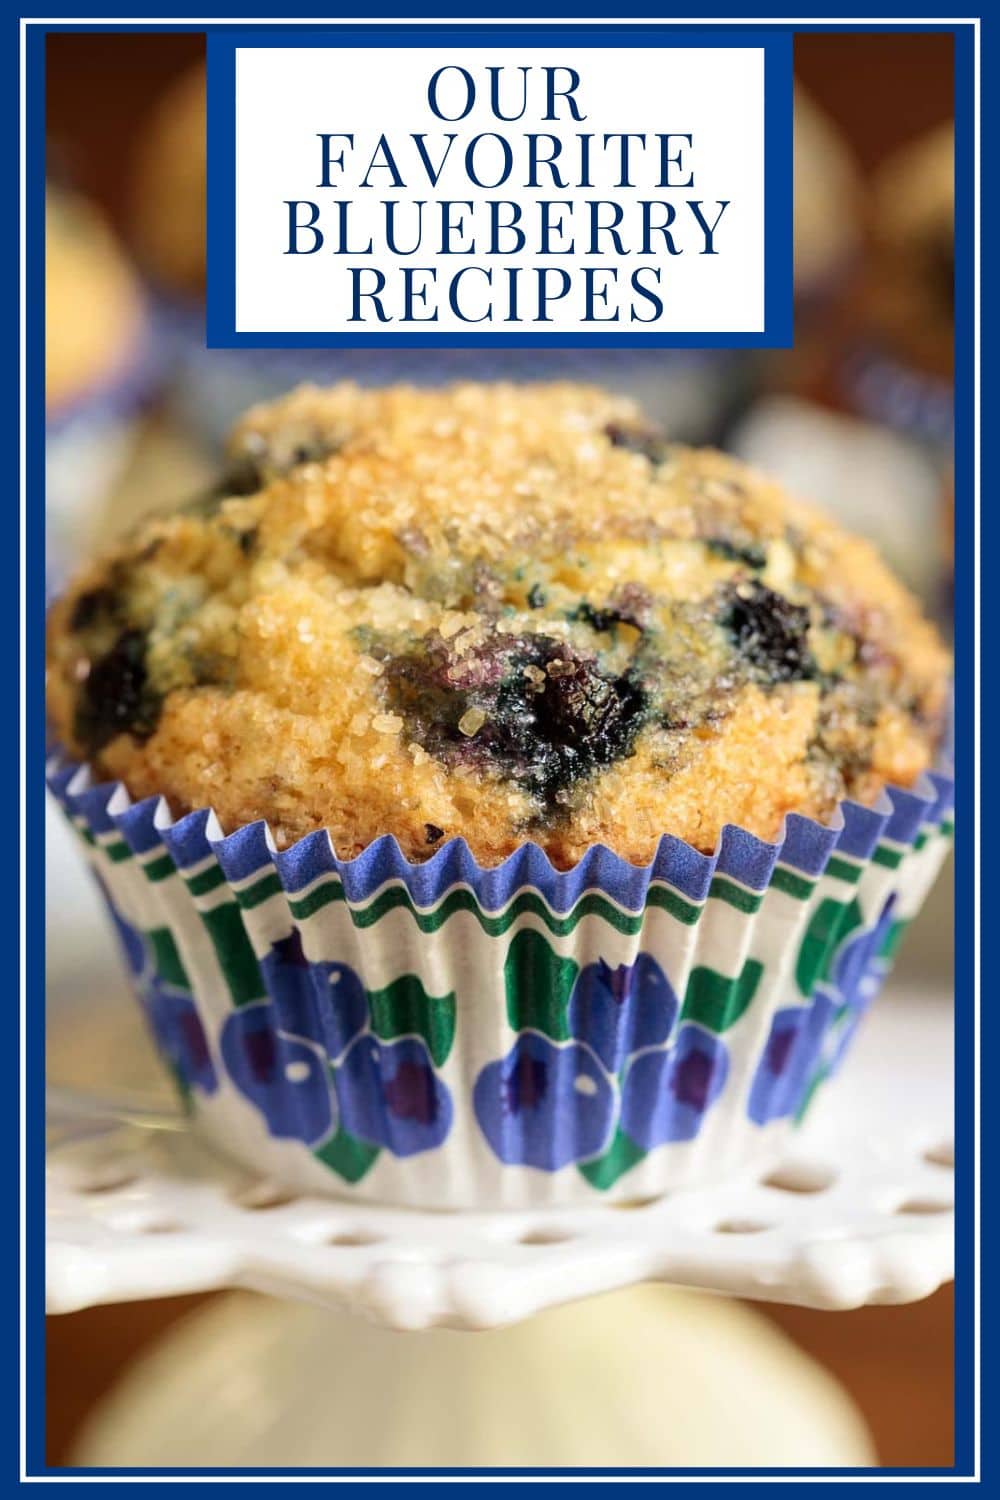 Savor the Season with these Summery Blueberry Recipes!